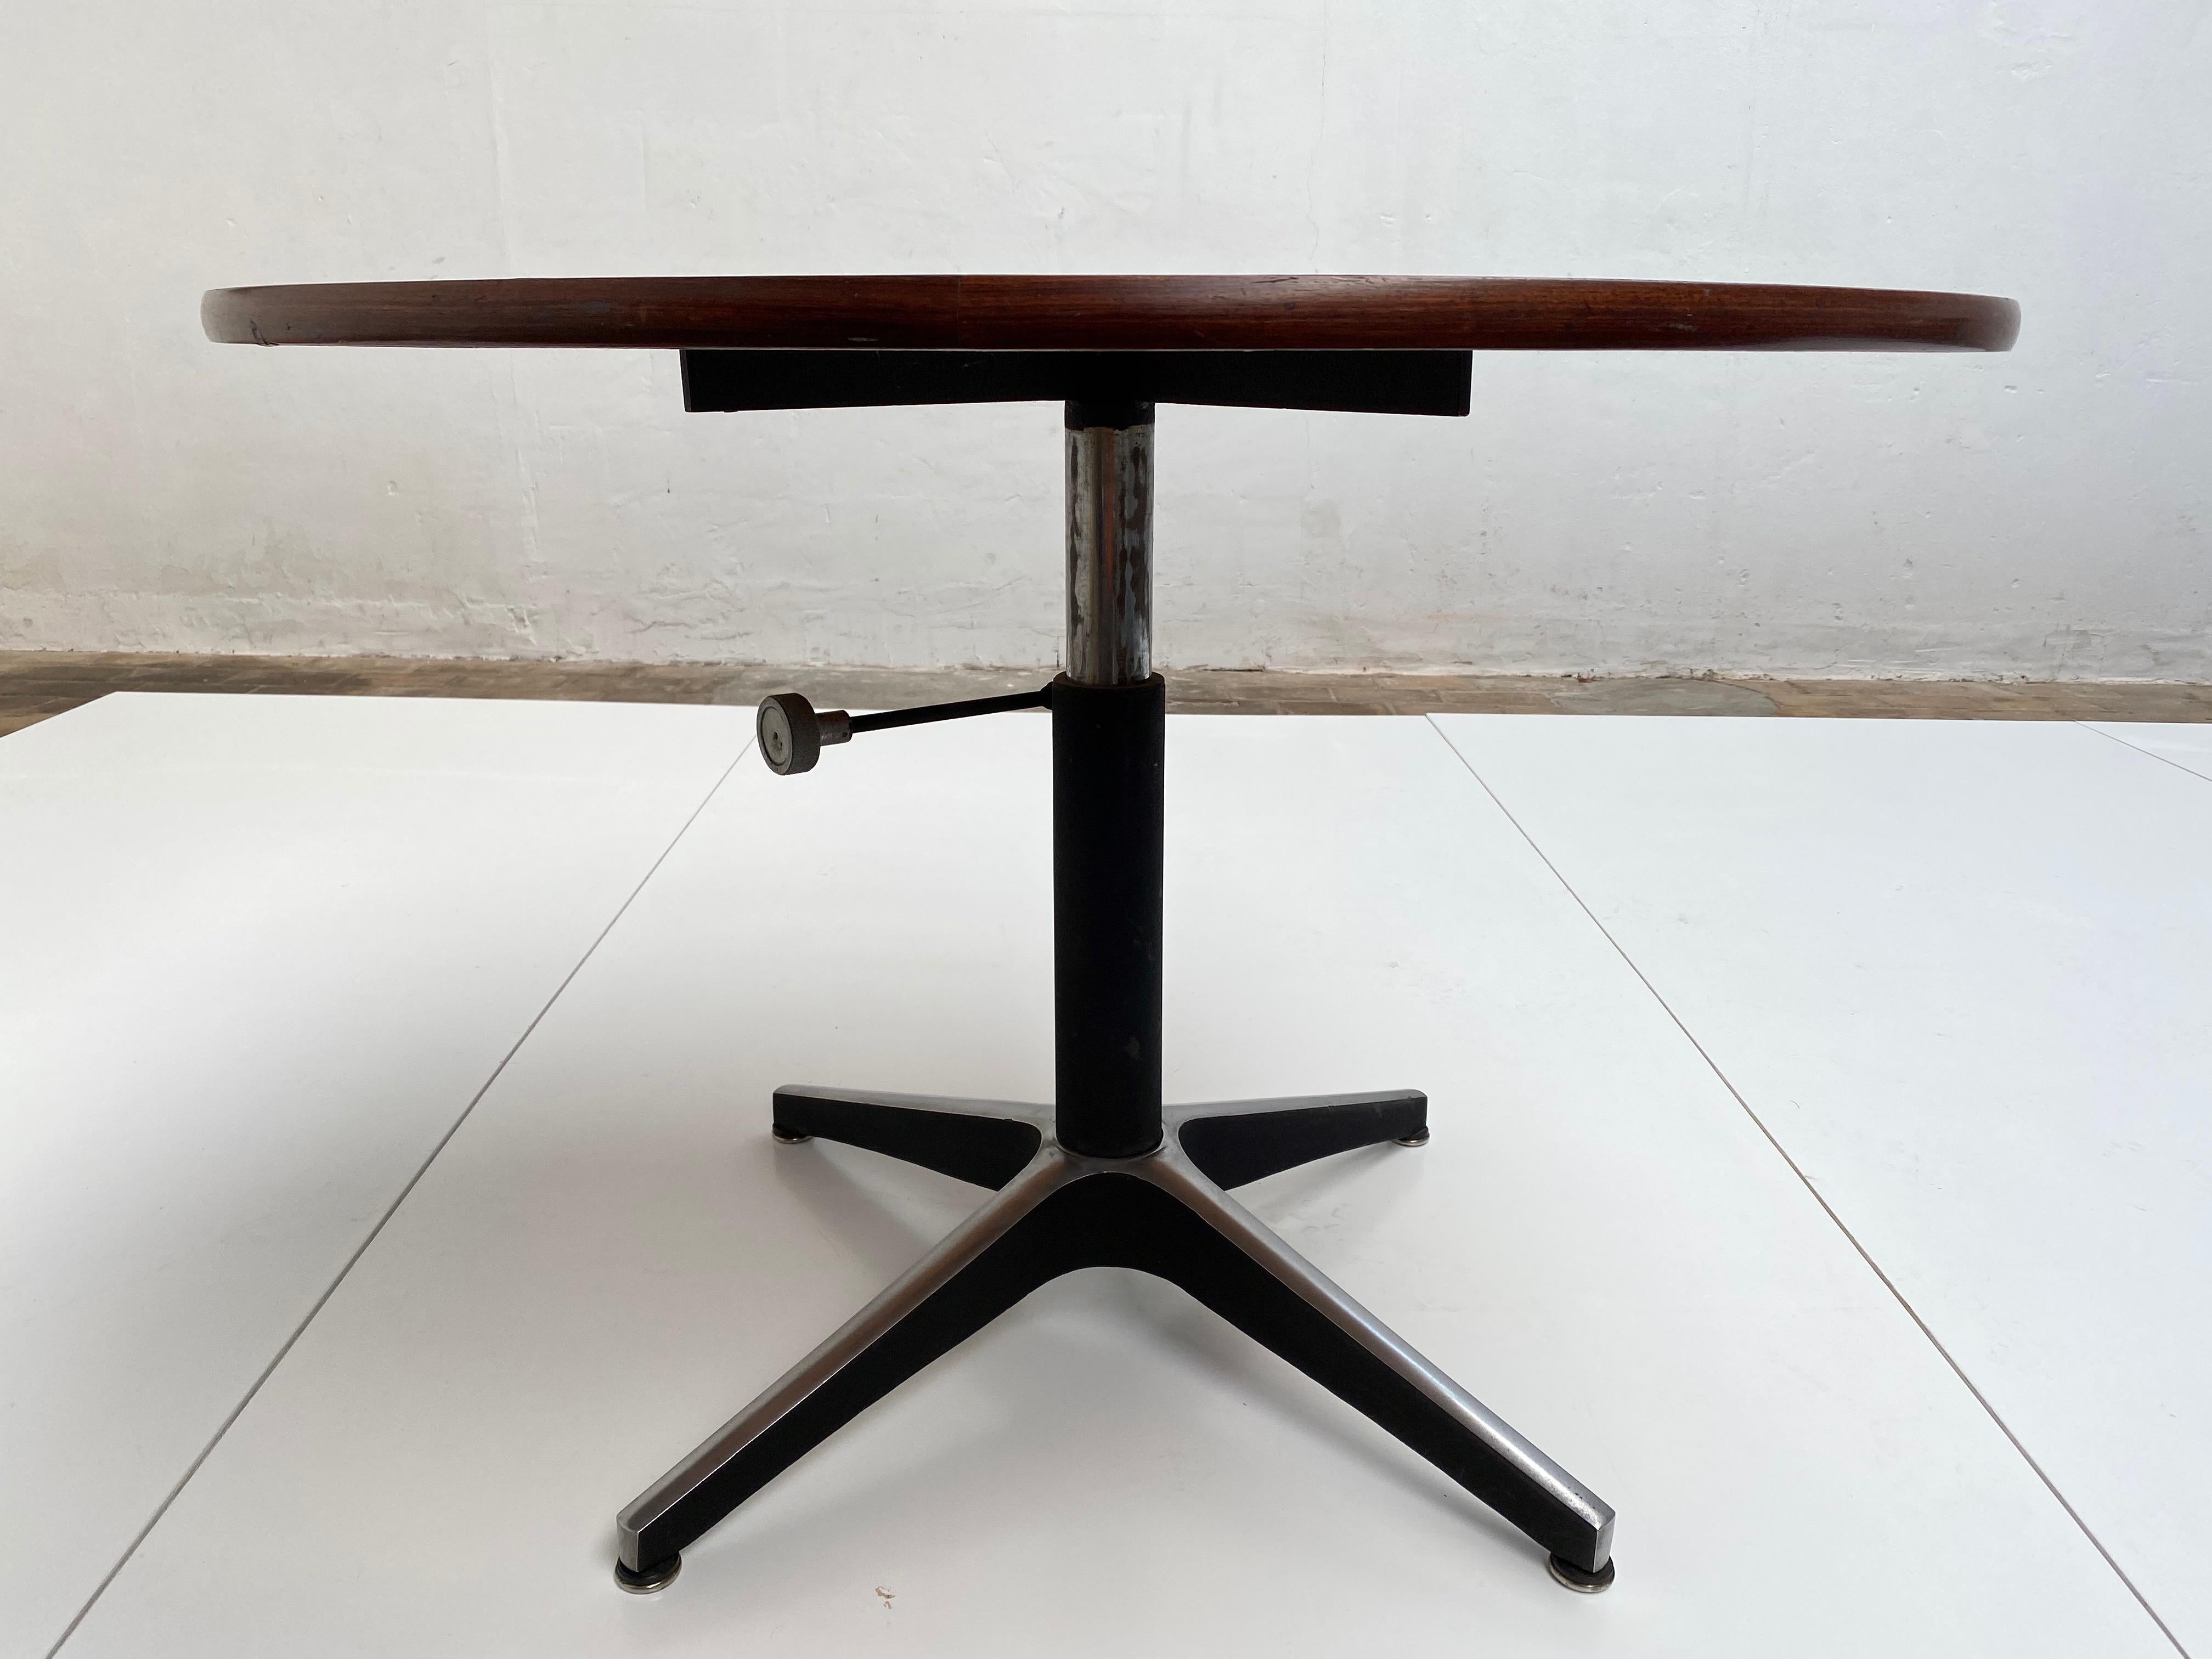 Enameled Campo & Graffi Adjustable Height Dining Table, 1959, Both Signed and Published